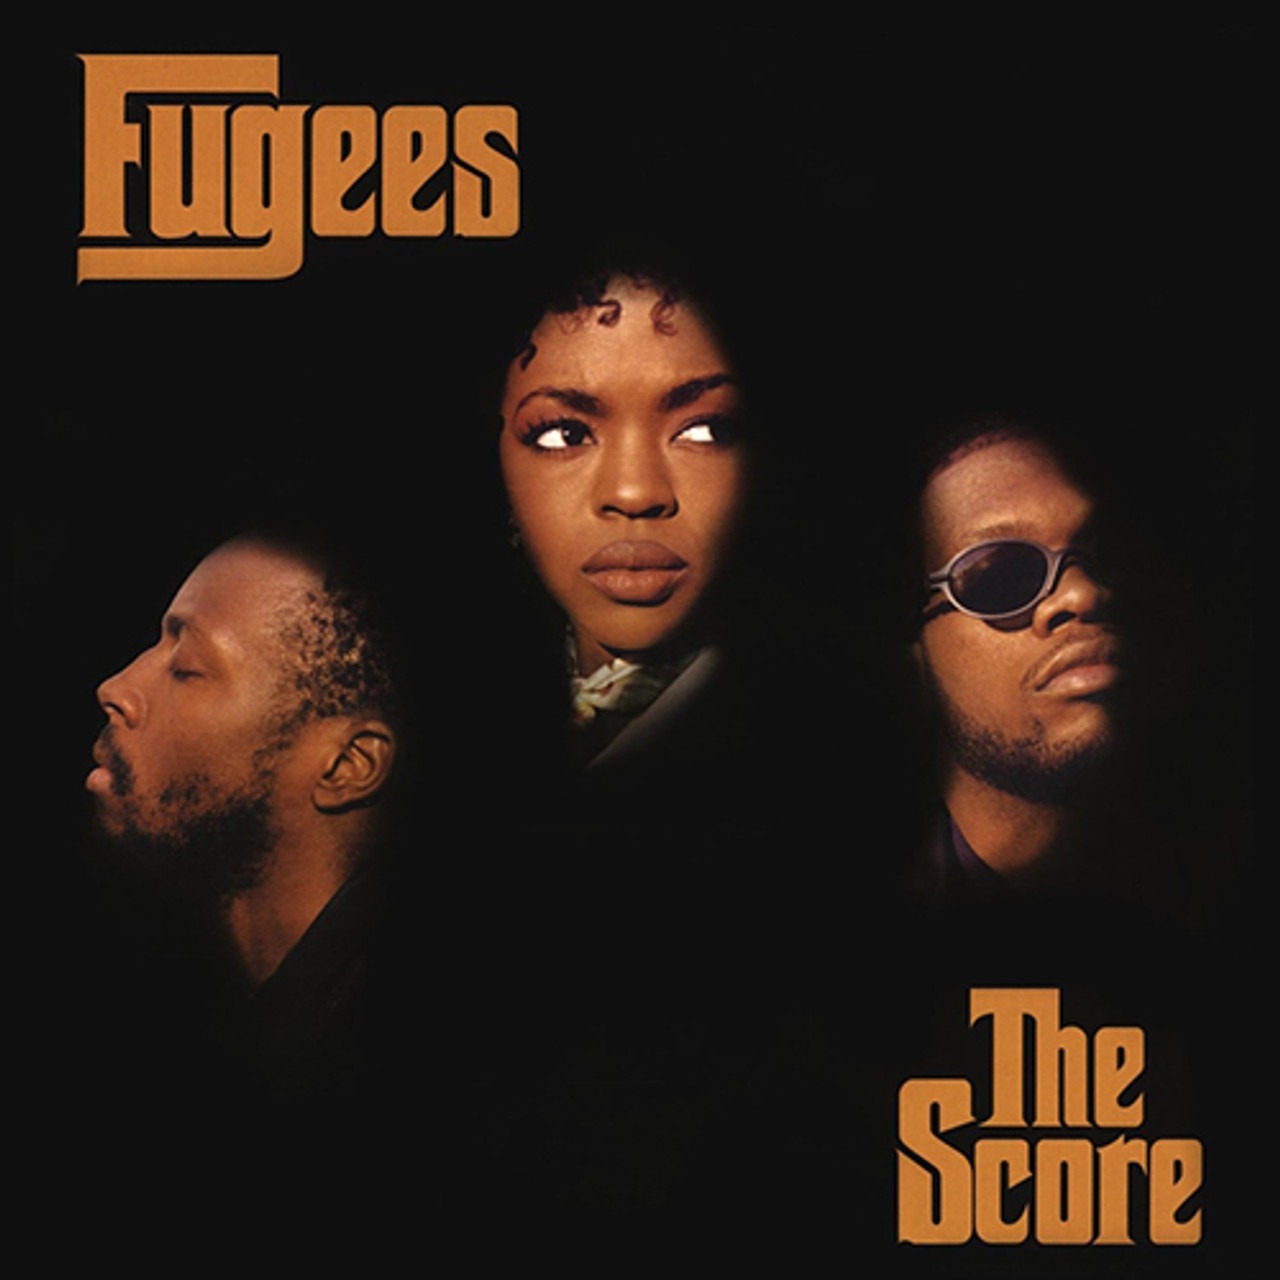 Fugees - The Score - credit by Columbia Records. Strictly for editorial purpose. No copyright infringement intended.